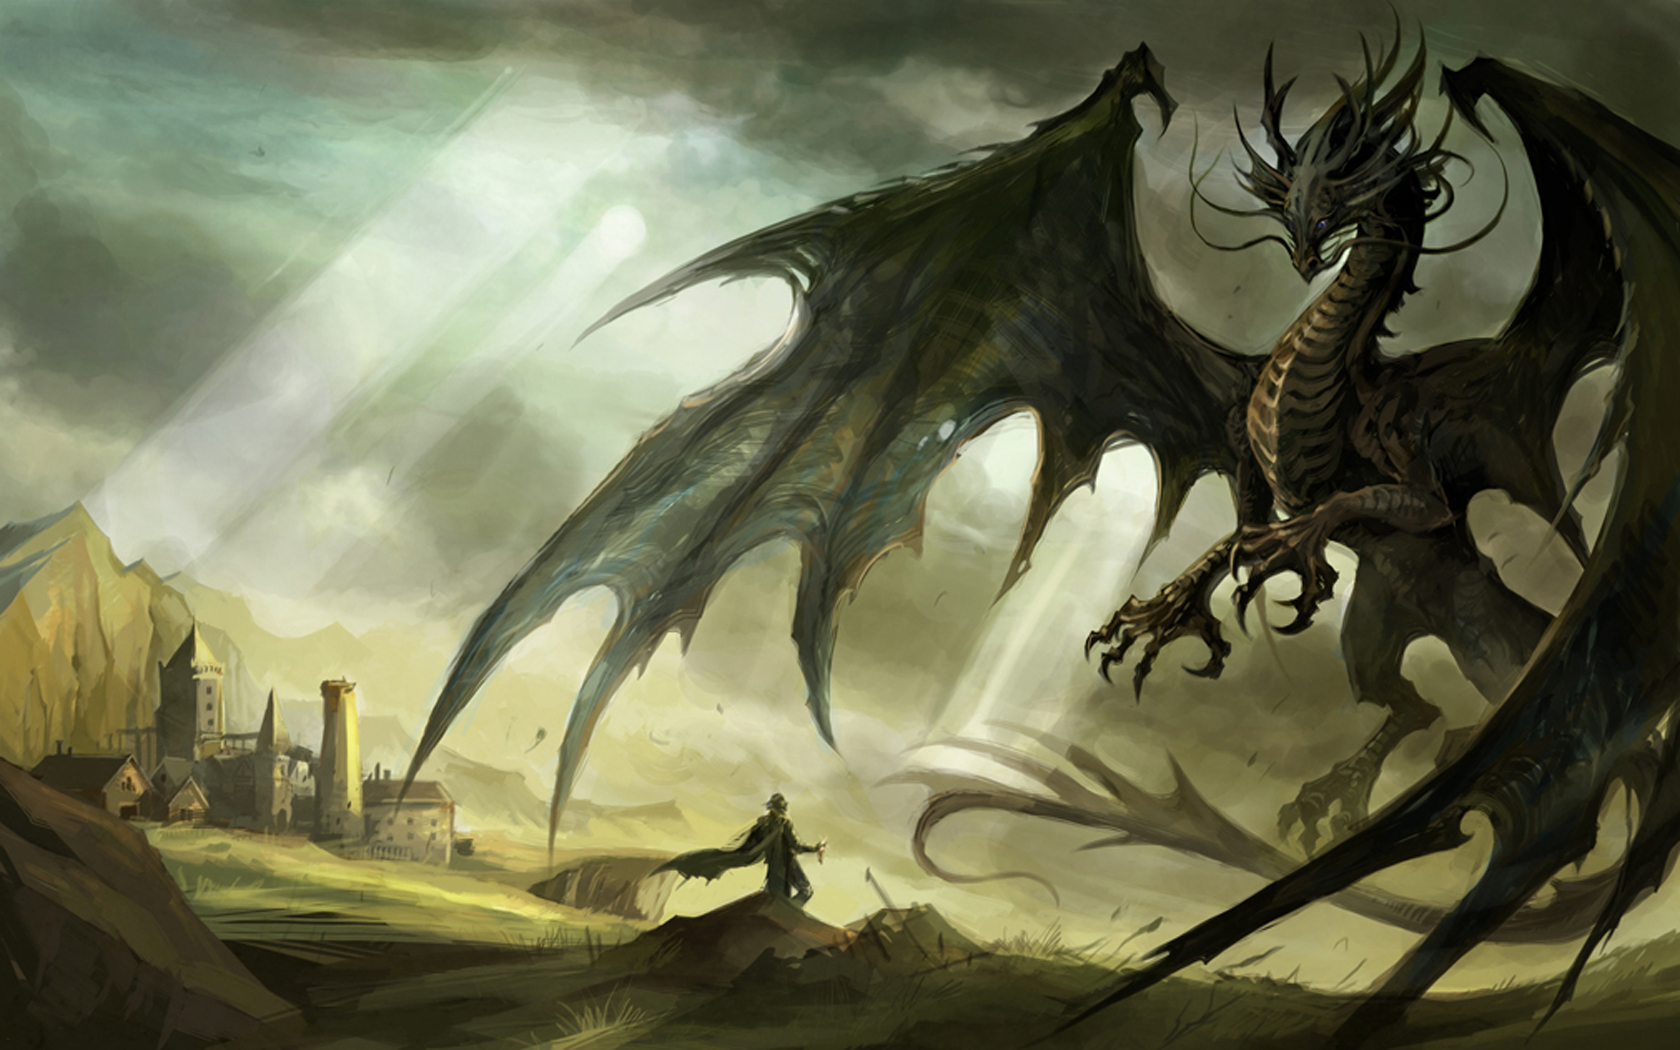 who was fafnir in norse mythology and why was fafnir transformed into a hideous dragon